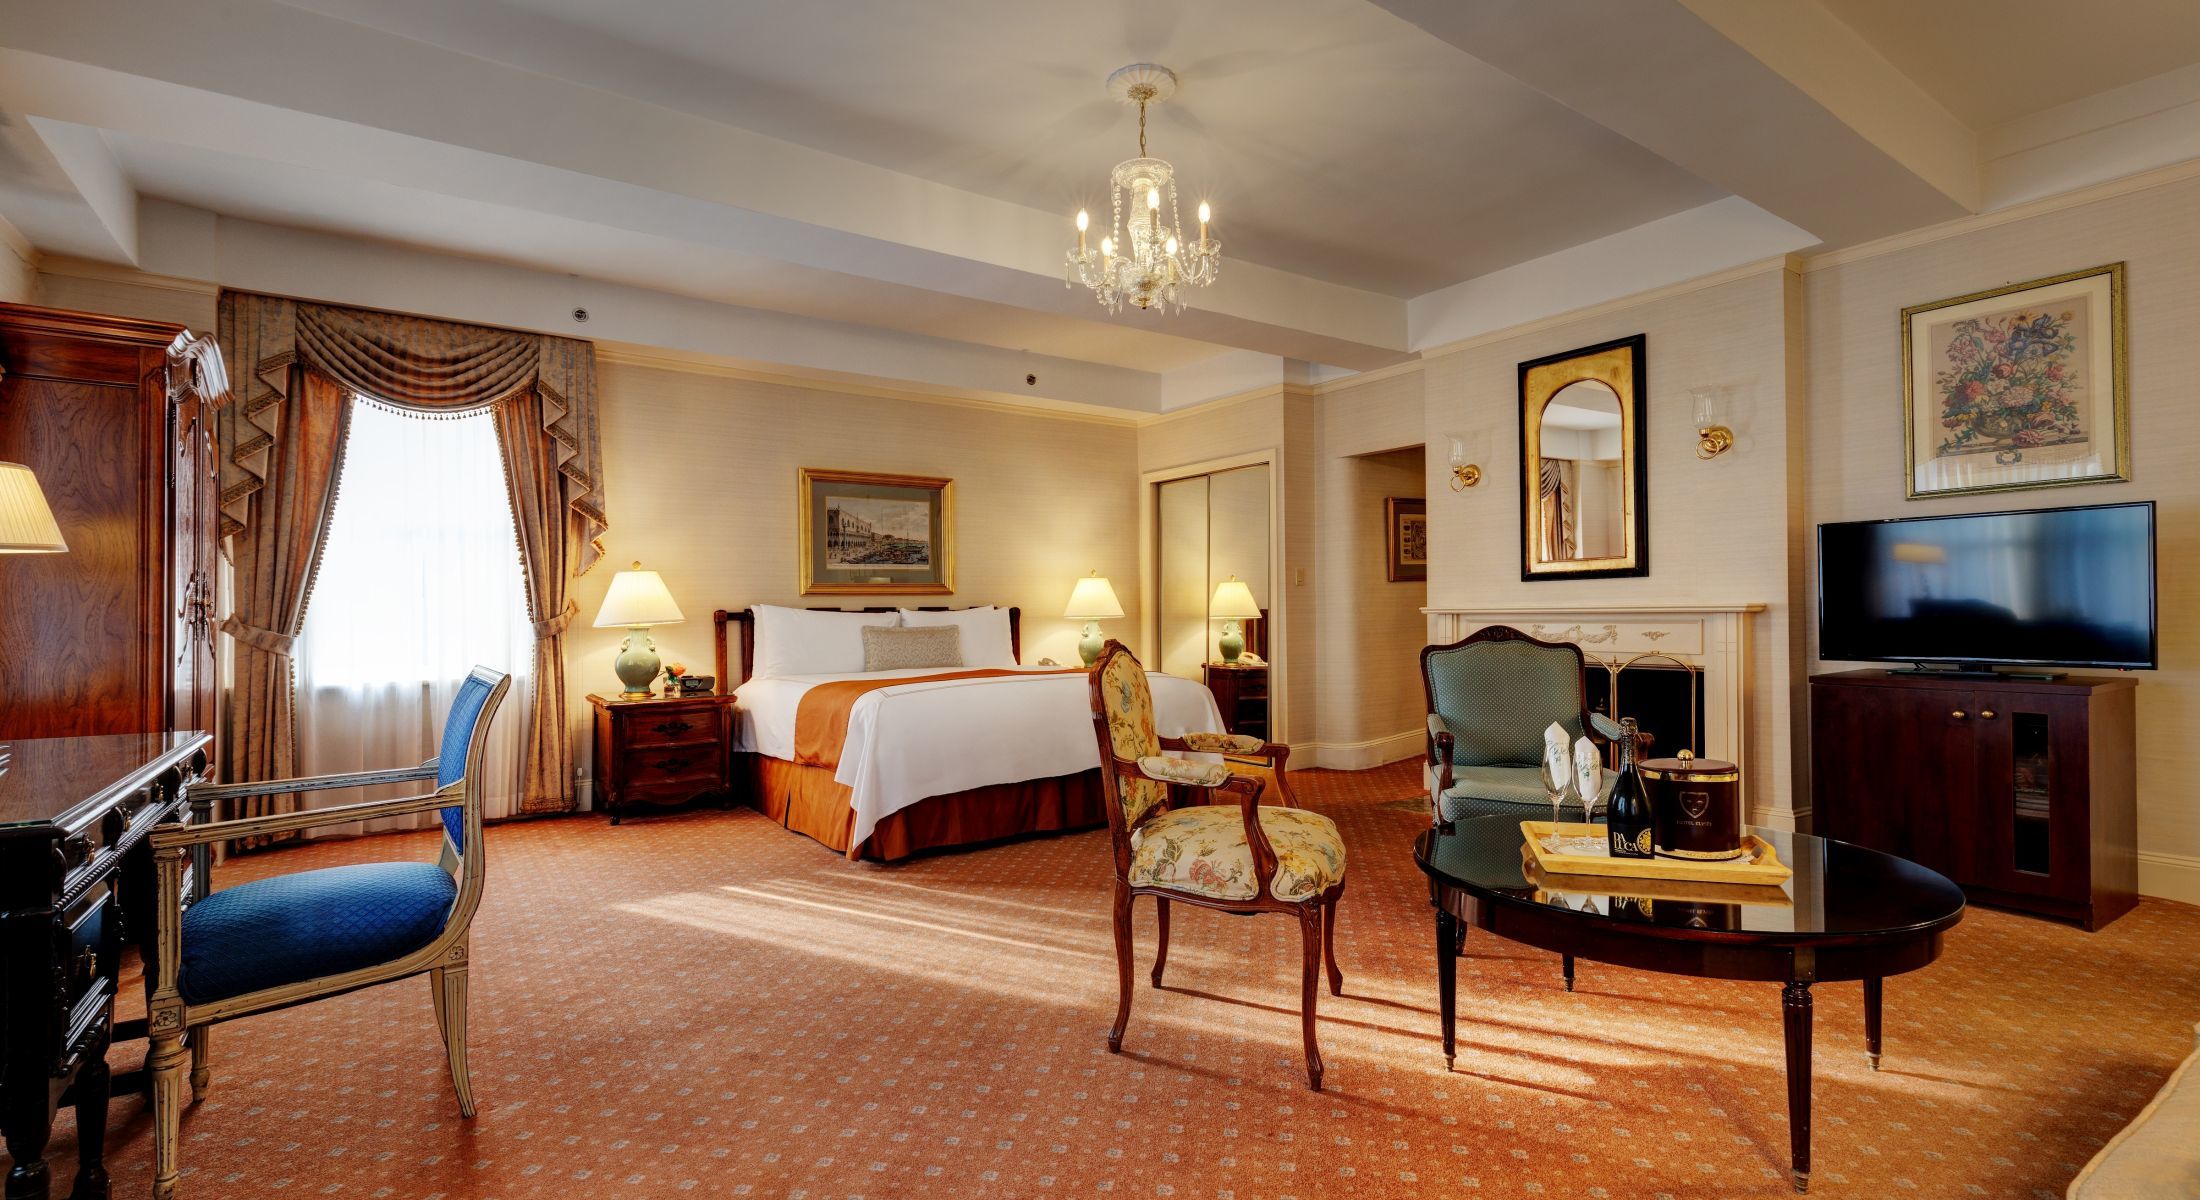 Beautiful Junior Suites at the Hotel Elysee feature faux fireplaces and two televisions